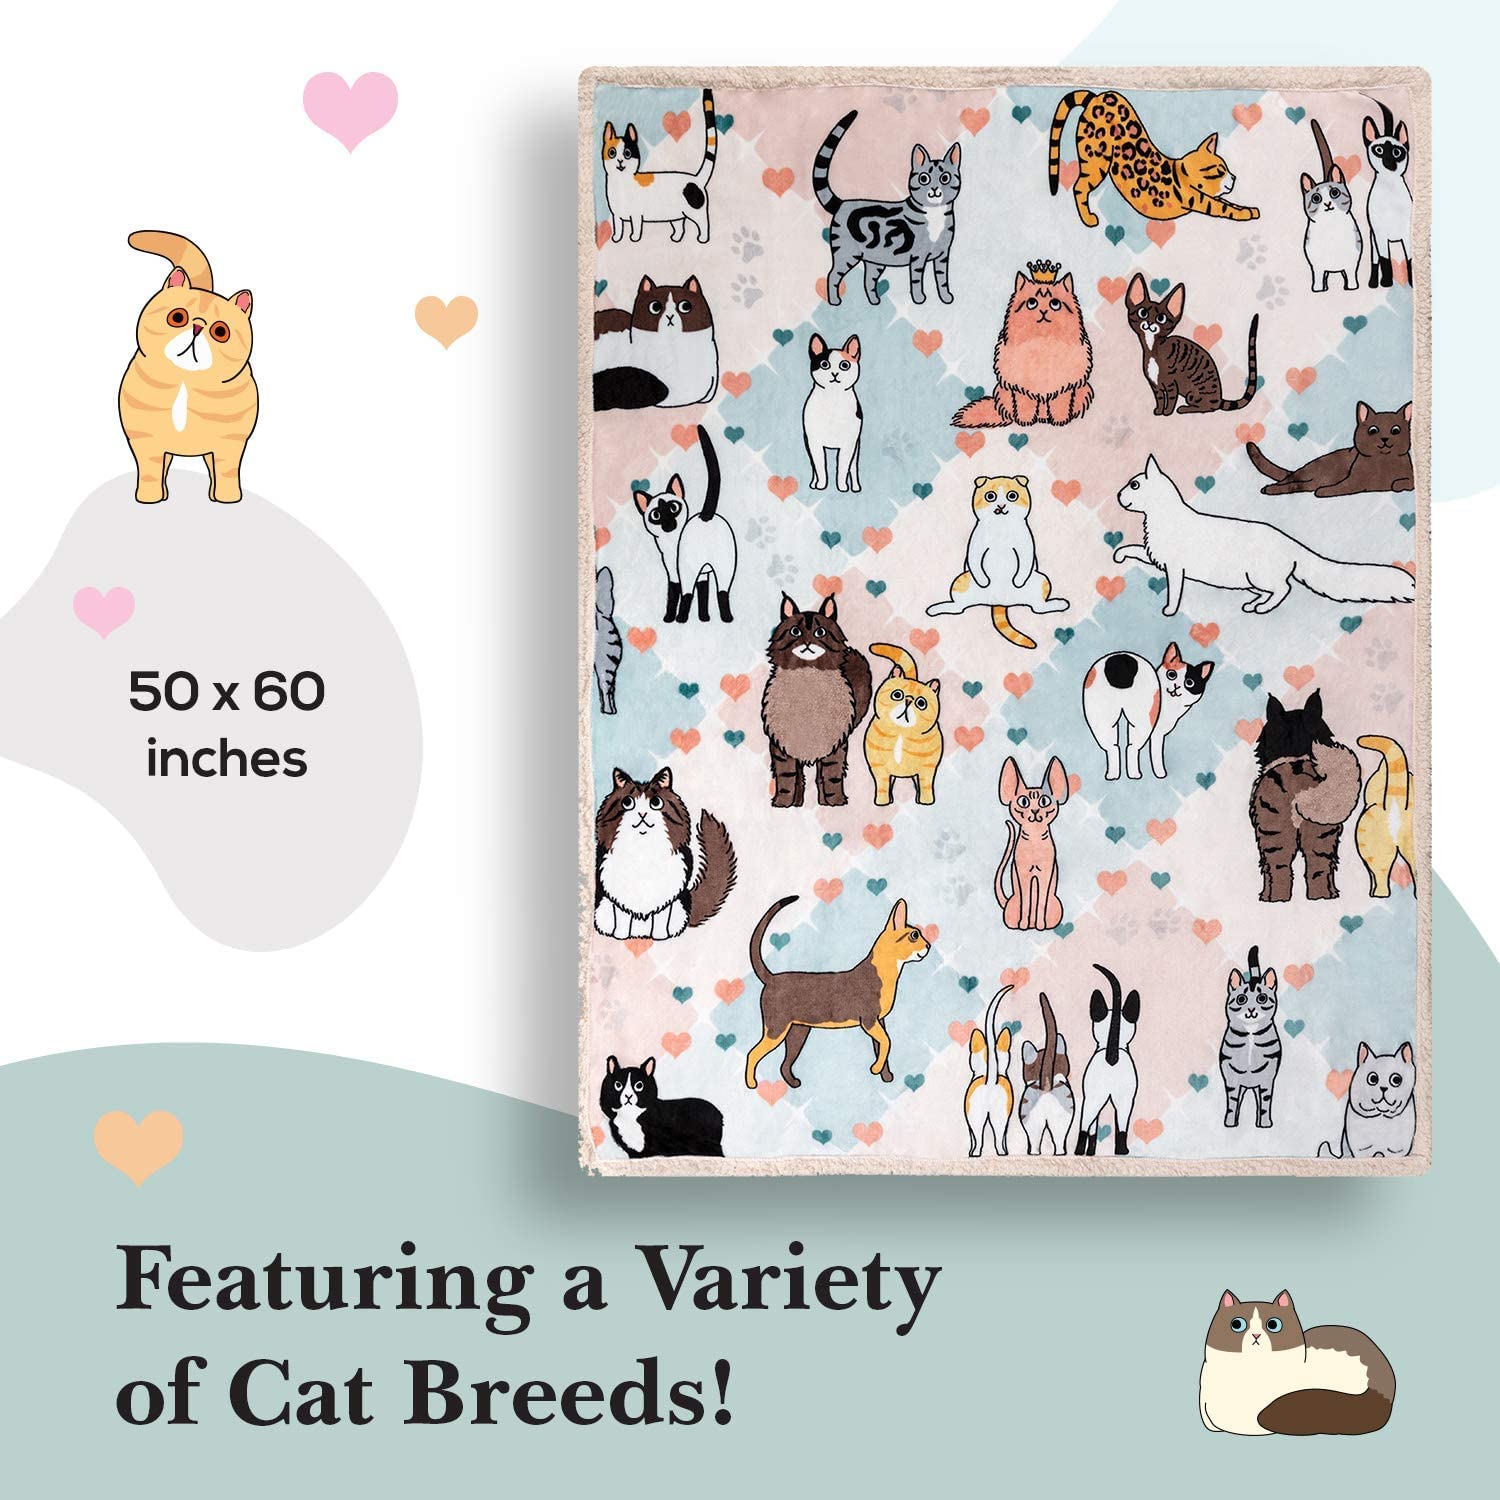 Gifts for Cat Lovers - 28 Cute Cat Companions Blanket, Gift for Cat Lovers, Valentine's Gift, Gift for Her Him, Soft Cat Lover Throw Blanket - The Most Beloved Cat